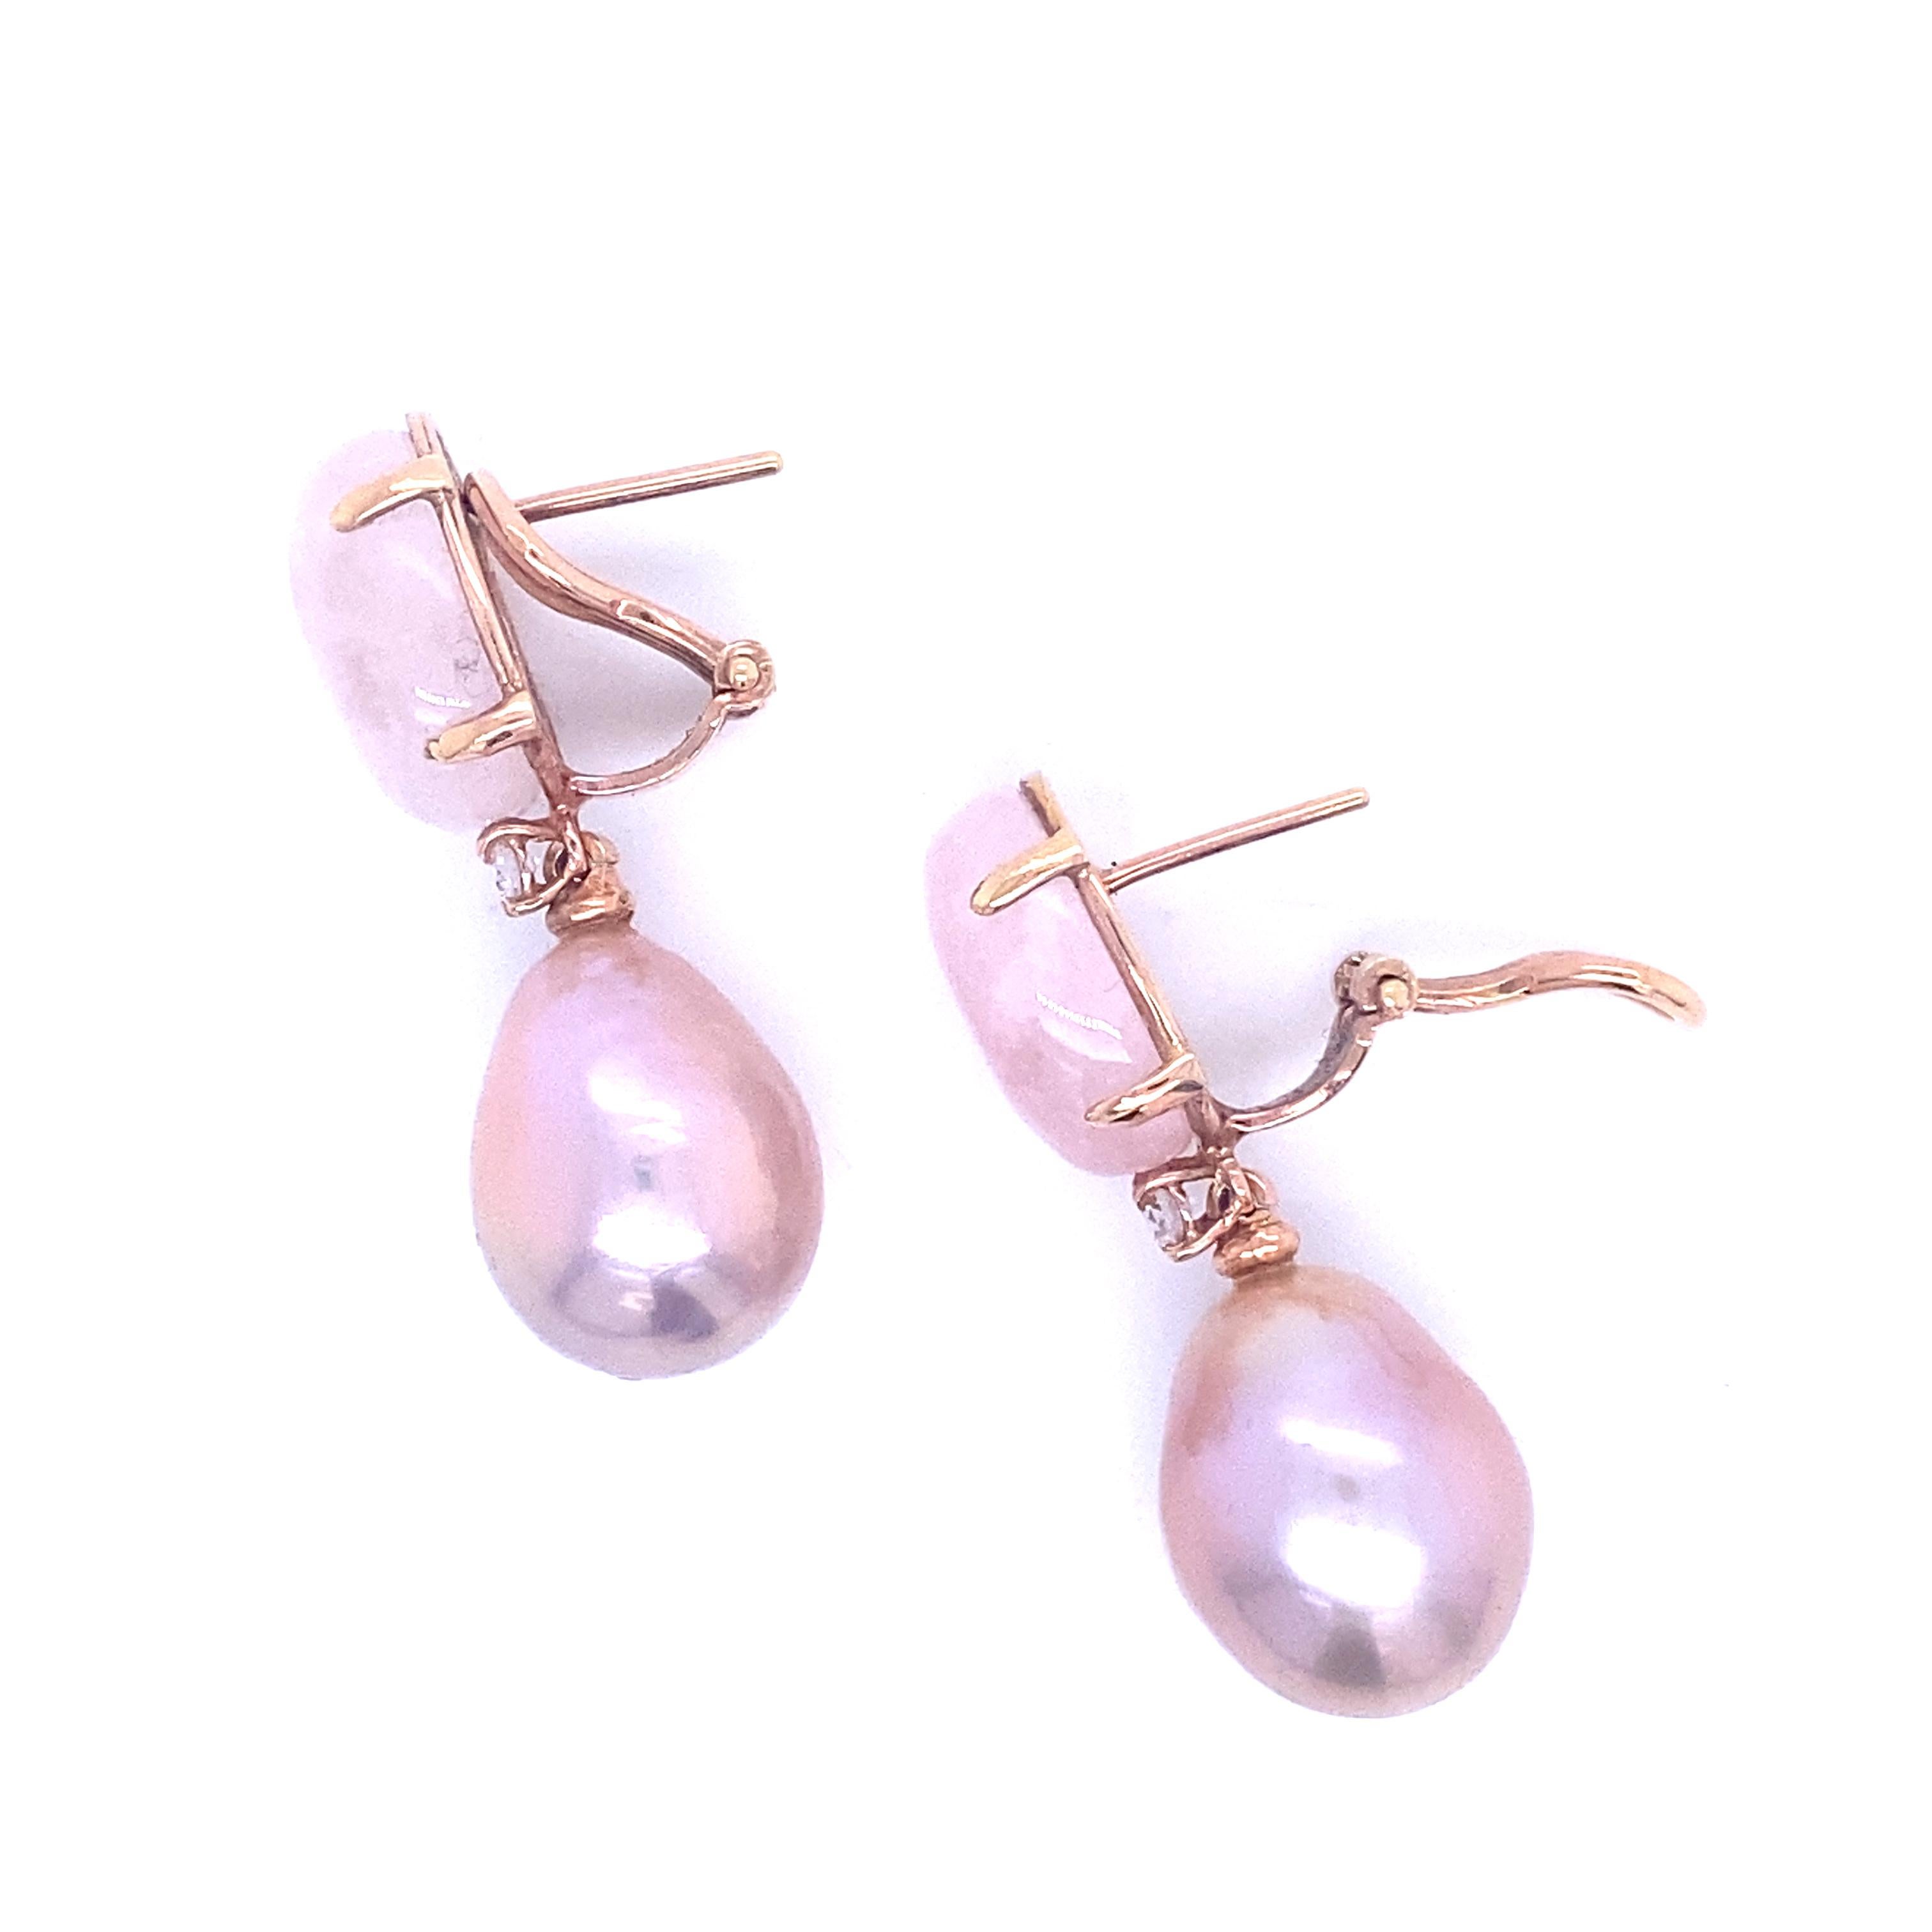 Discover these magnificent rose gold earrings from the French collection of Mesure et Art du Temps. These earrings are a true jewel of elegance and sophistication, harmoniously combining moranite, pearls and diamonds.

The moranite, measuring 1.4 cm